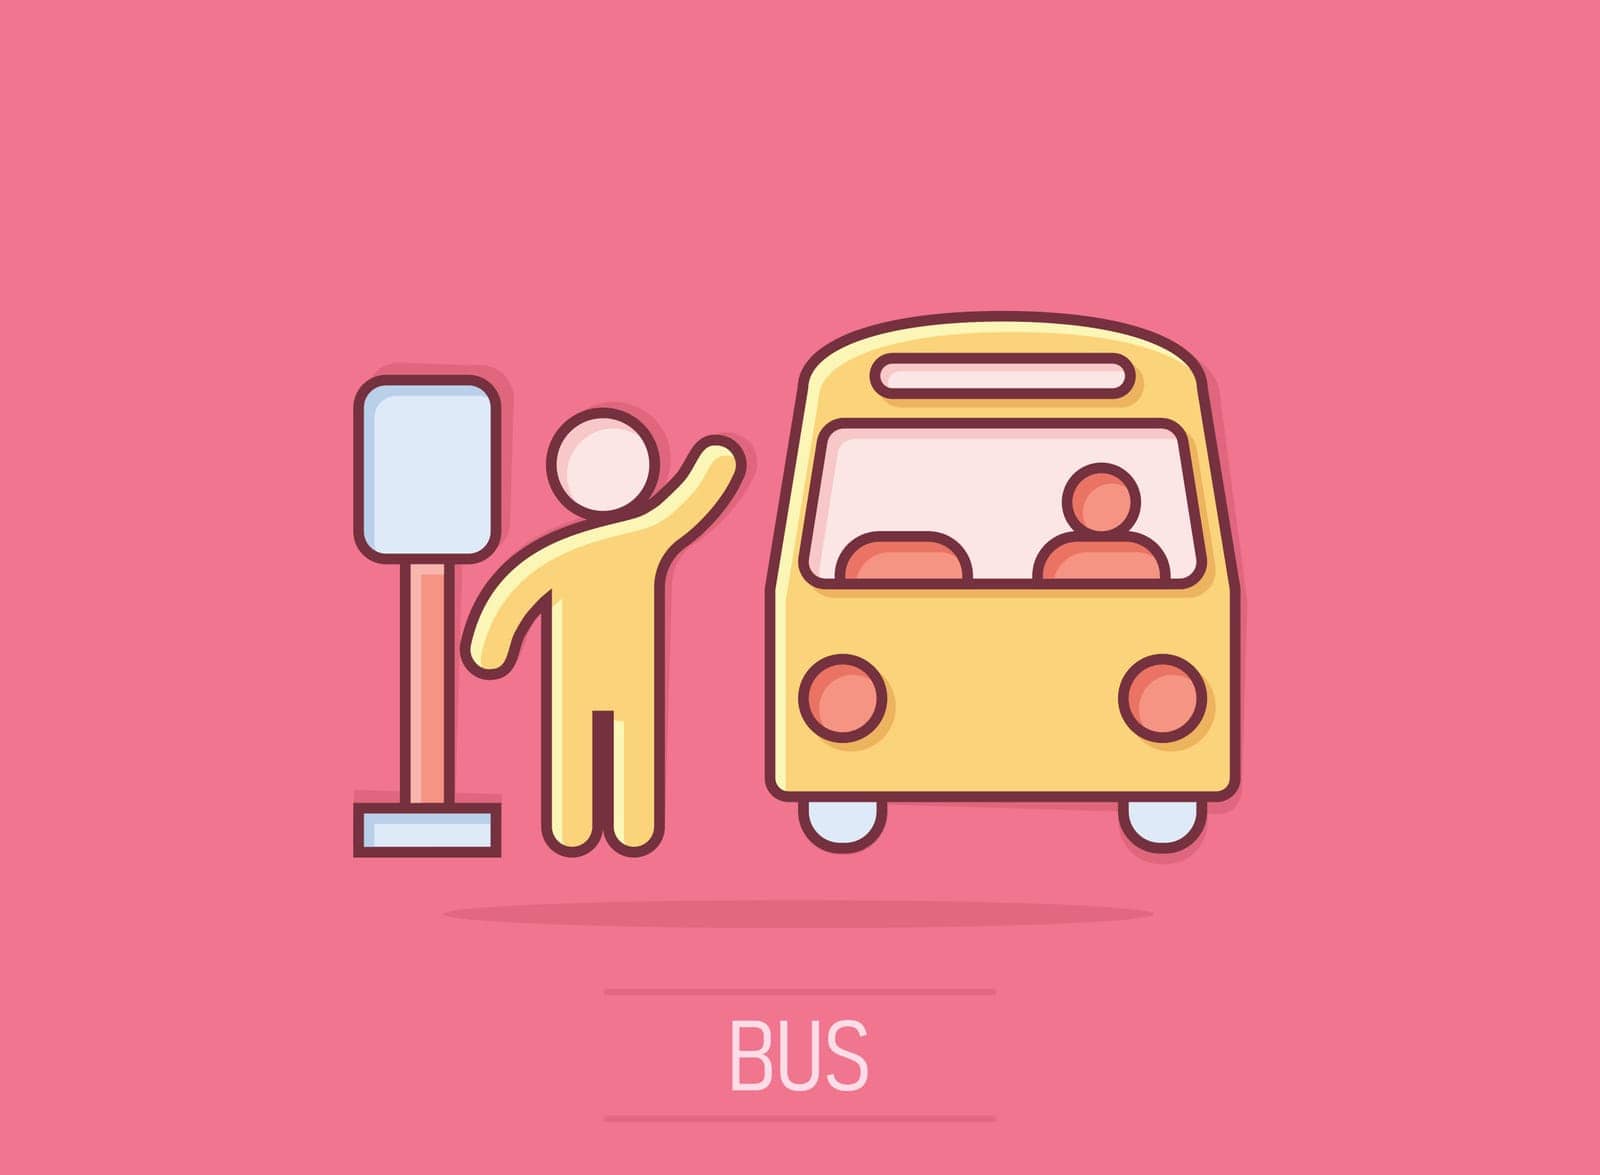 Bus station icon in comic style. Auto stop cartoon vector illustration on isolated background. Autobus vehicle splash effect business concept. by LysenkoA